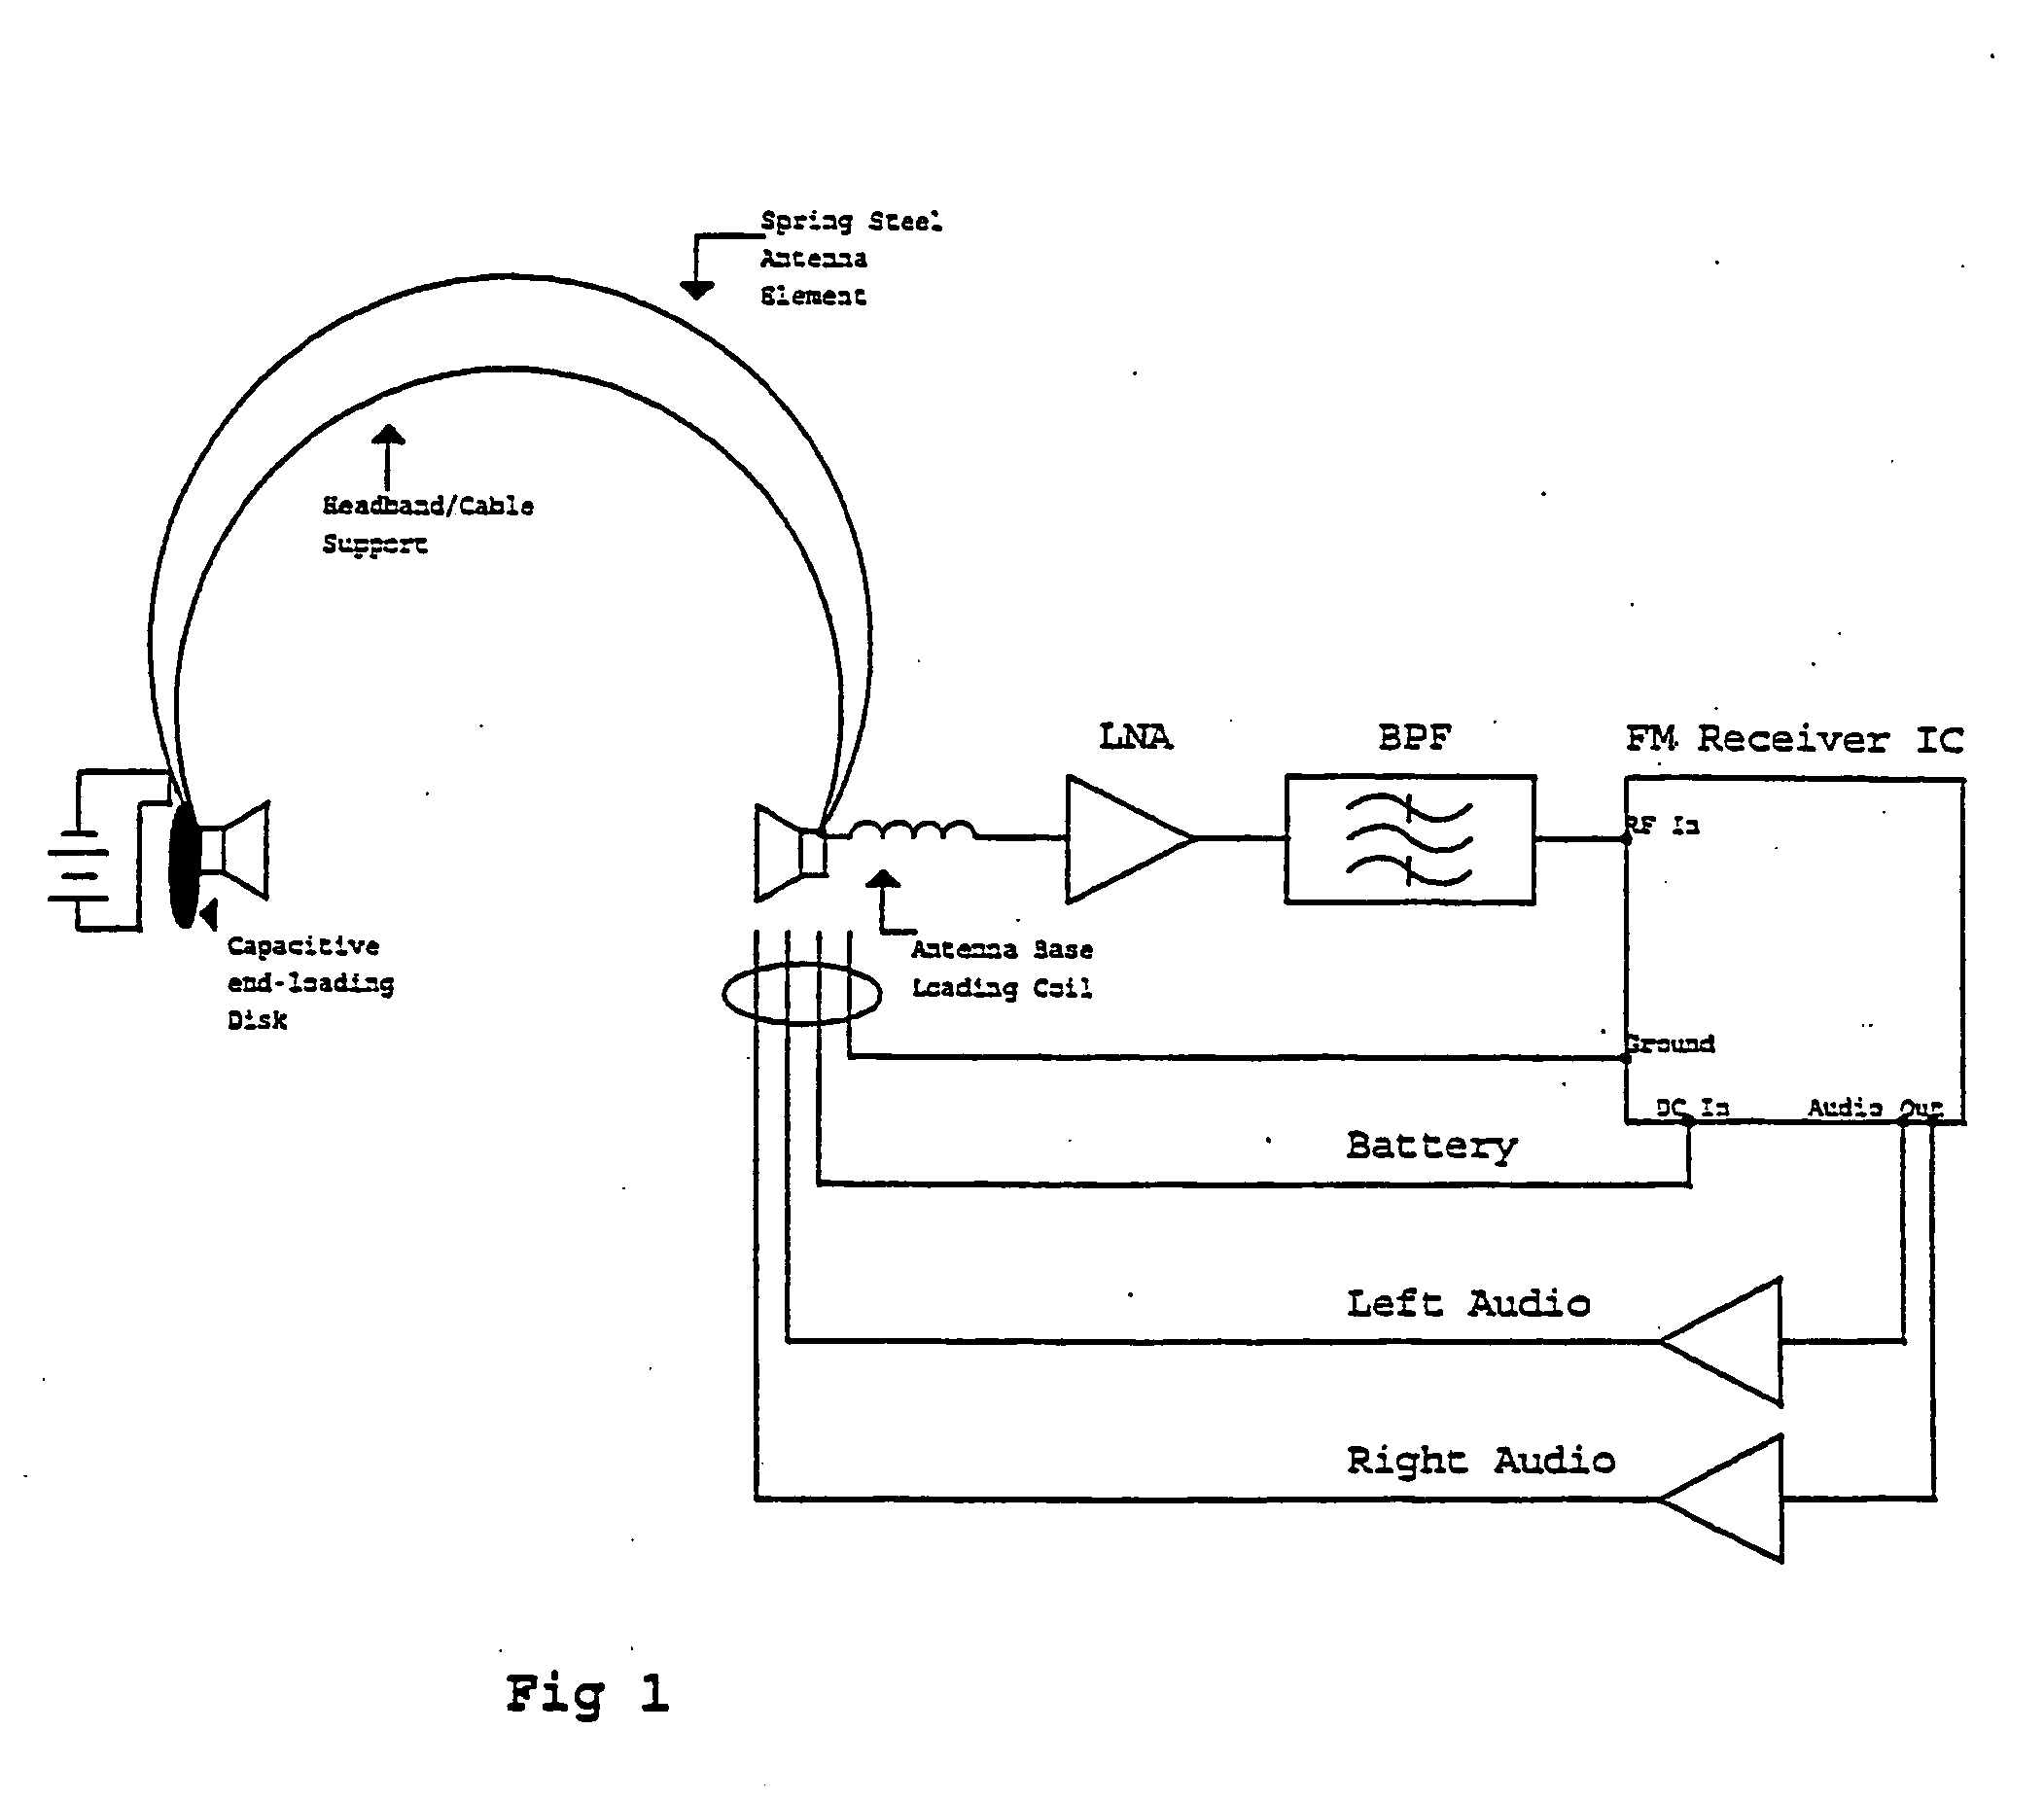 Headphone receiver apparatus for use with low power transmitters